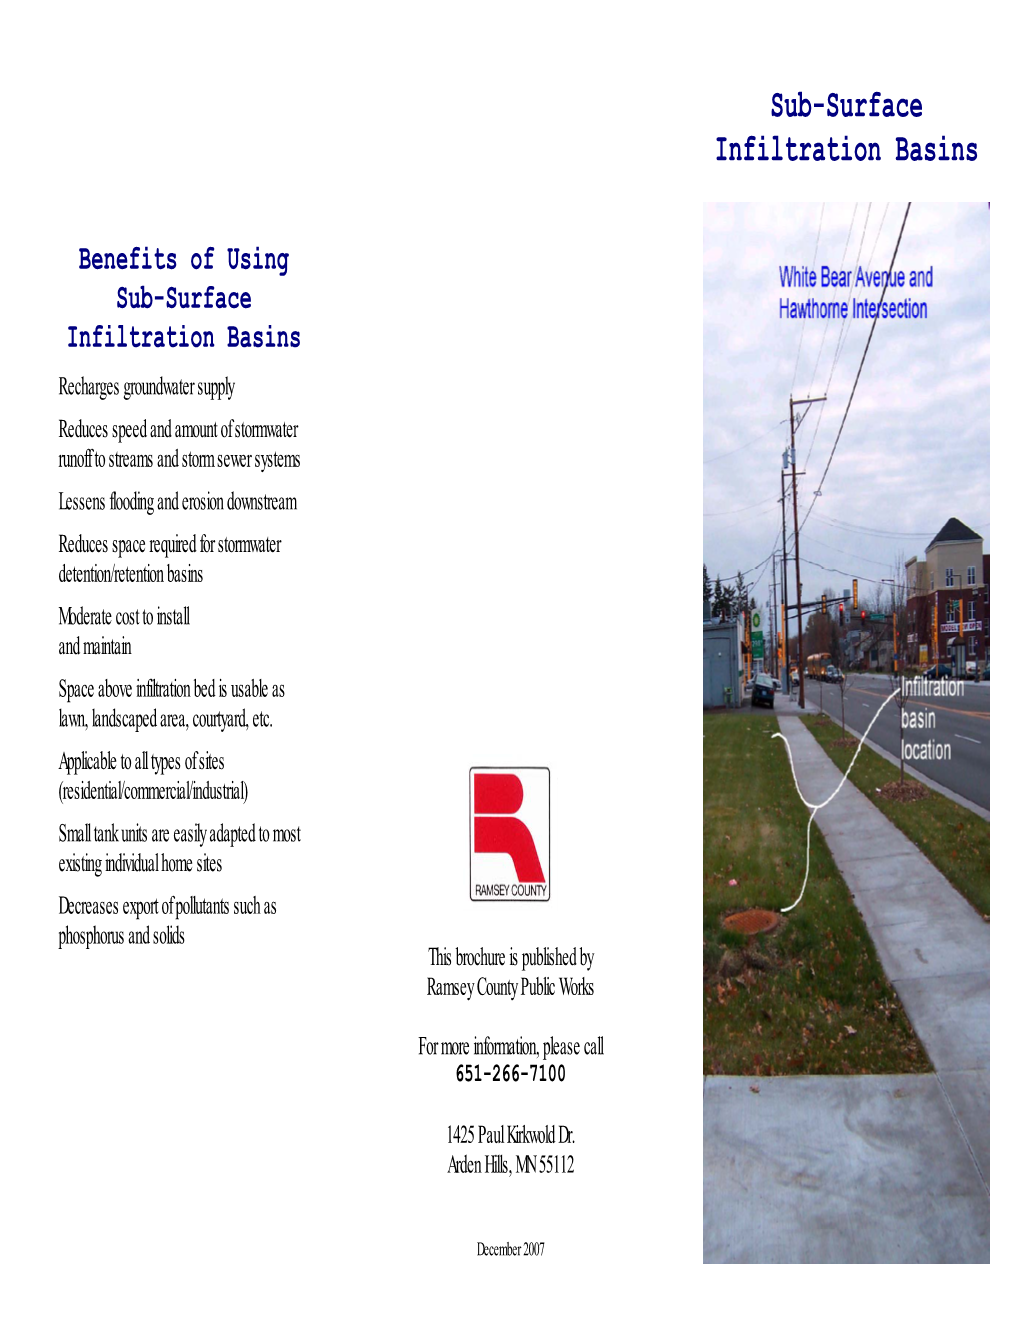 White Bear and Hawthorne Avenues Infiltration Basin Brochure